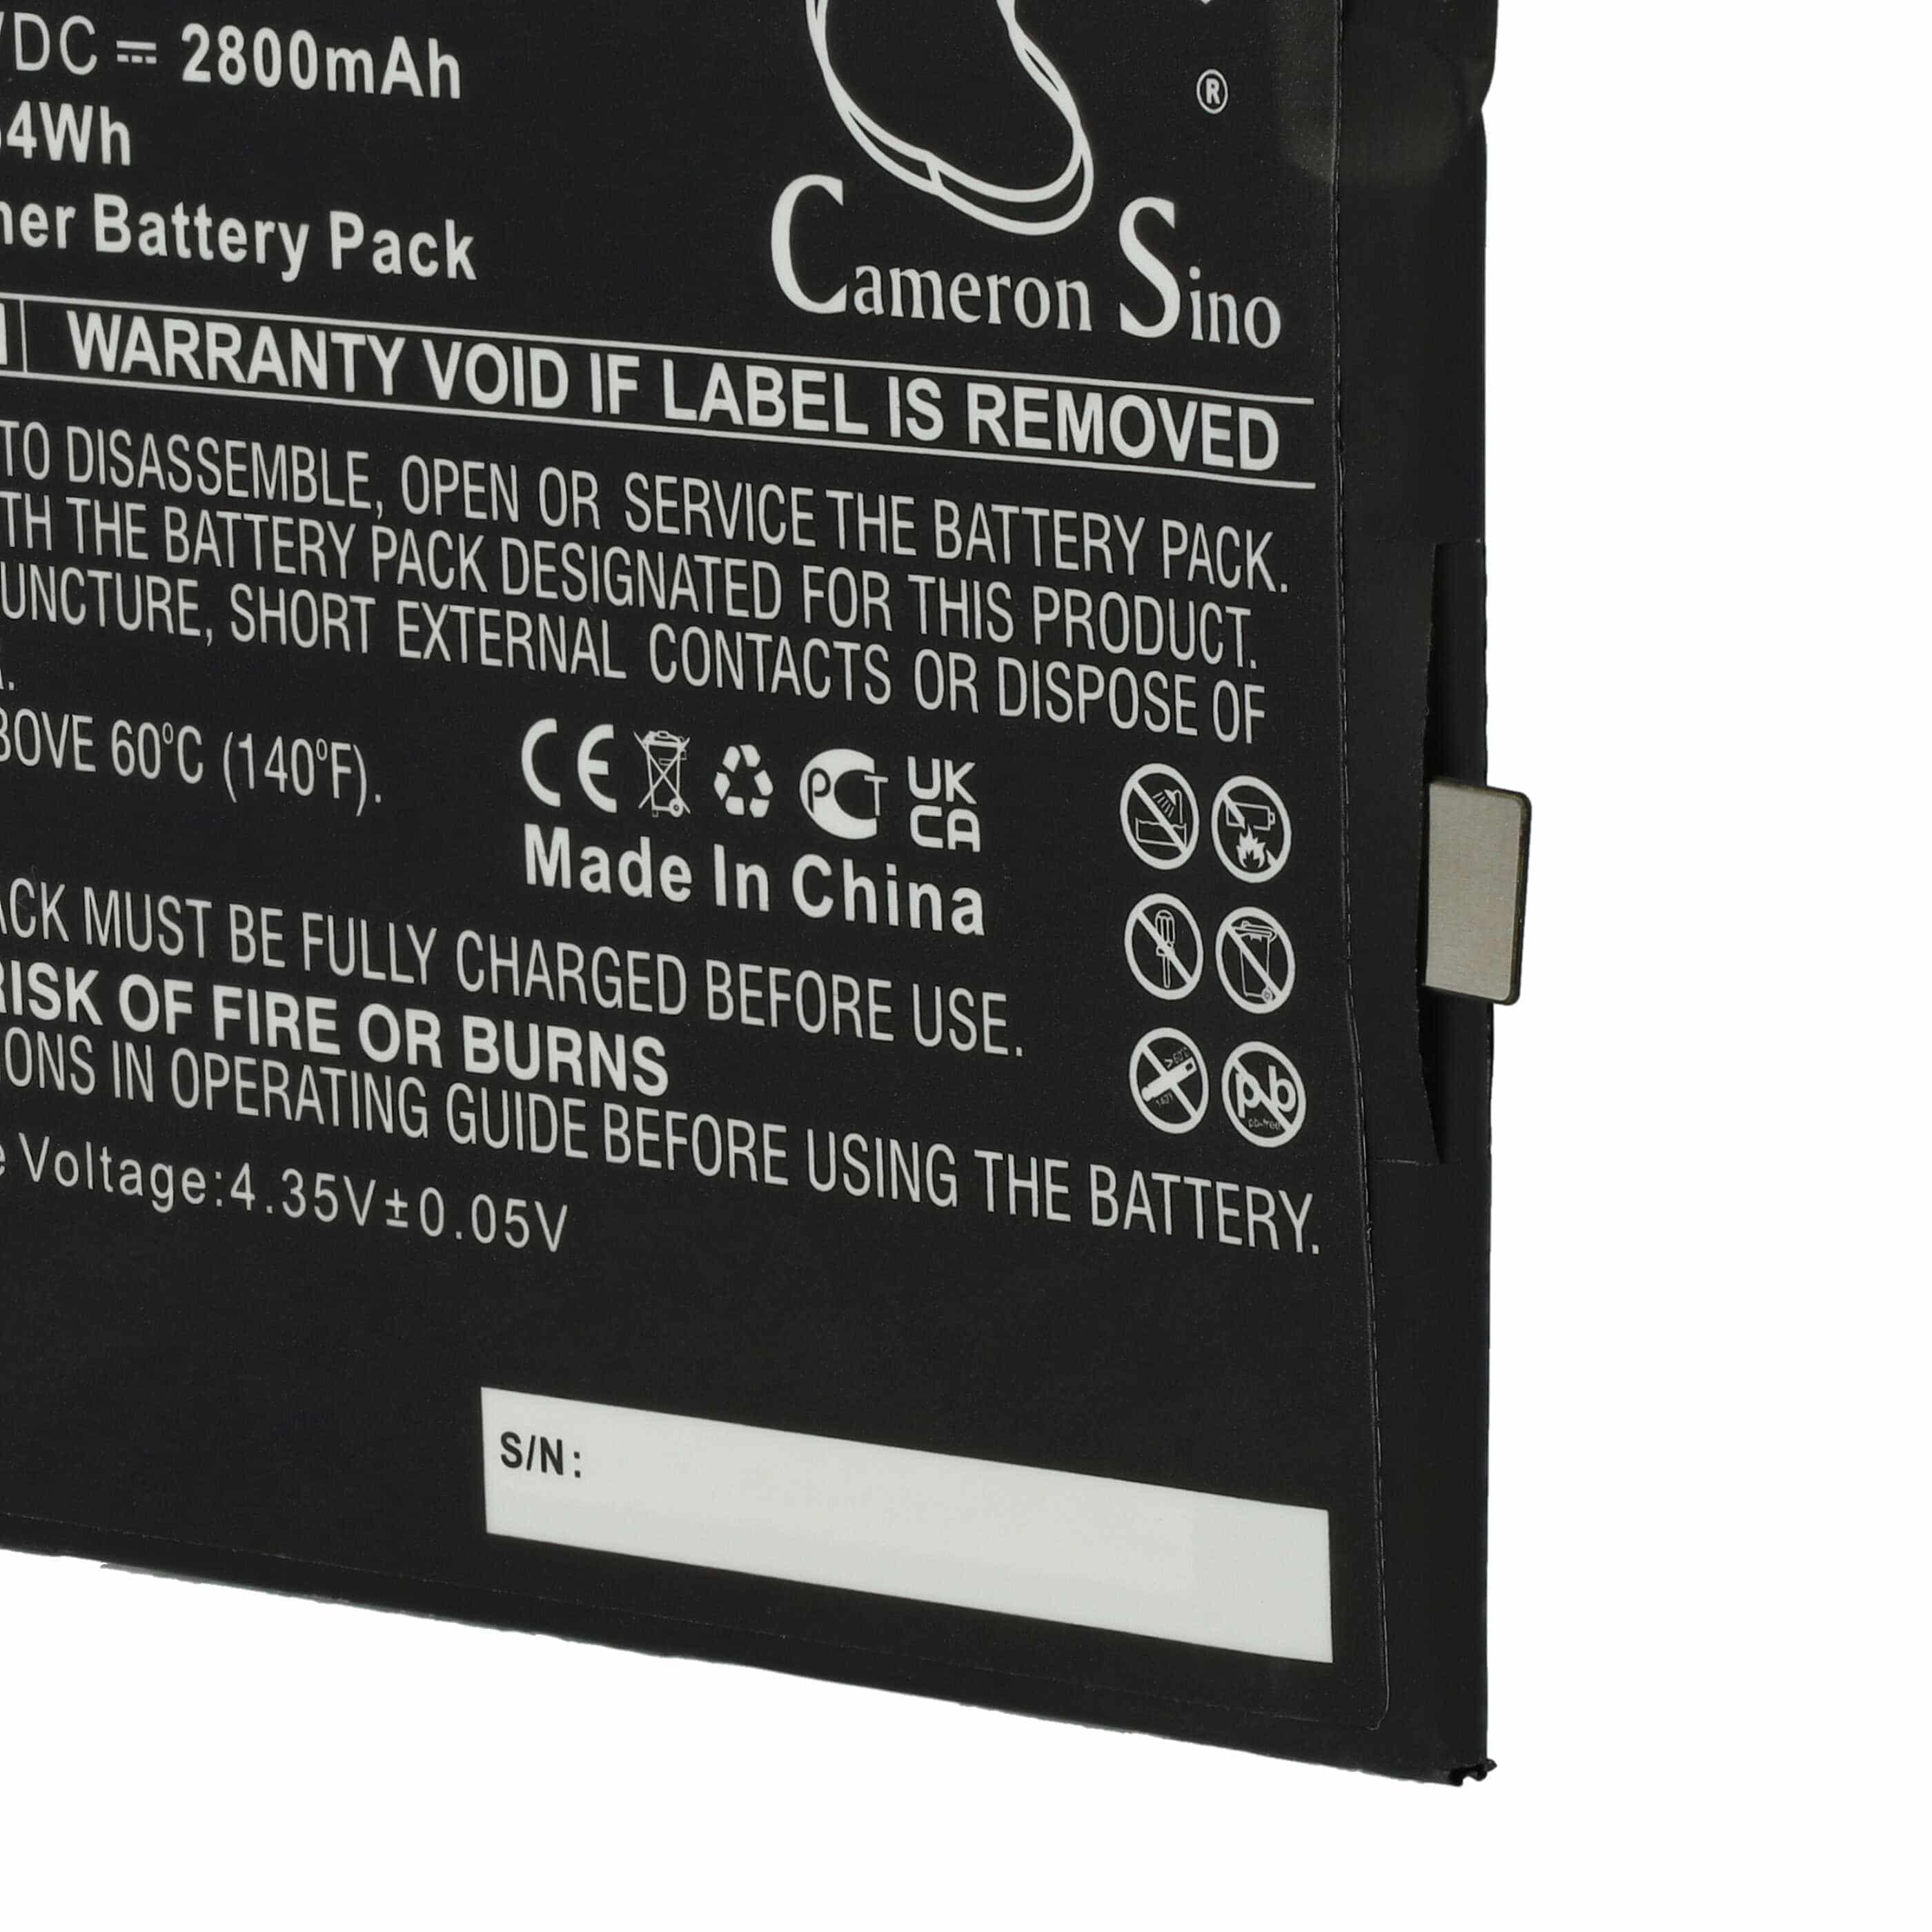 Mobile Phone Battery Replacement for Archos AC55GR - 2800mAh 3.8V Li-polymer